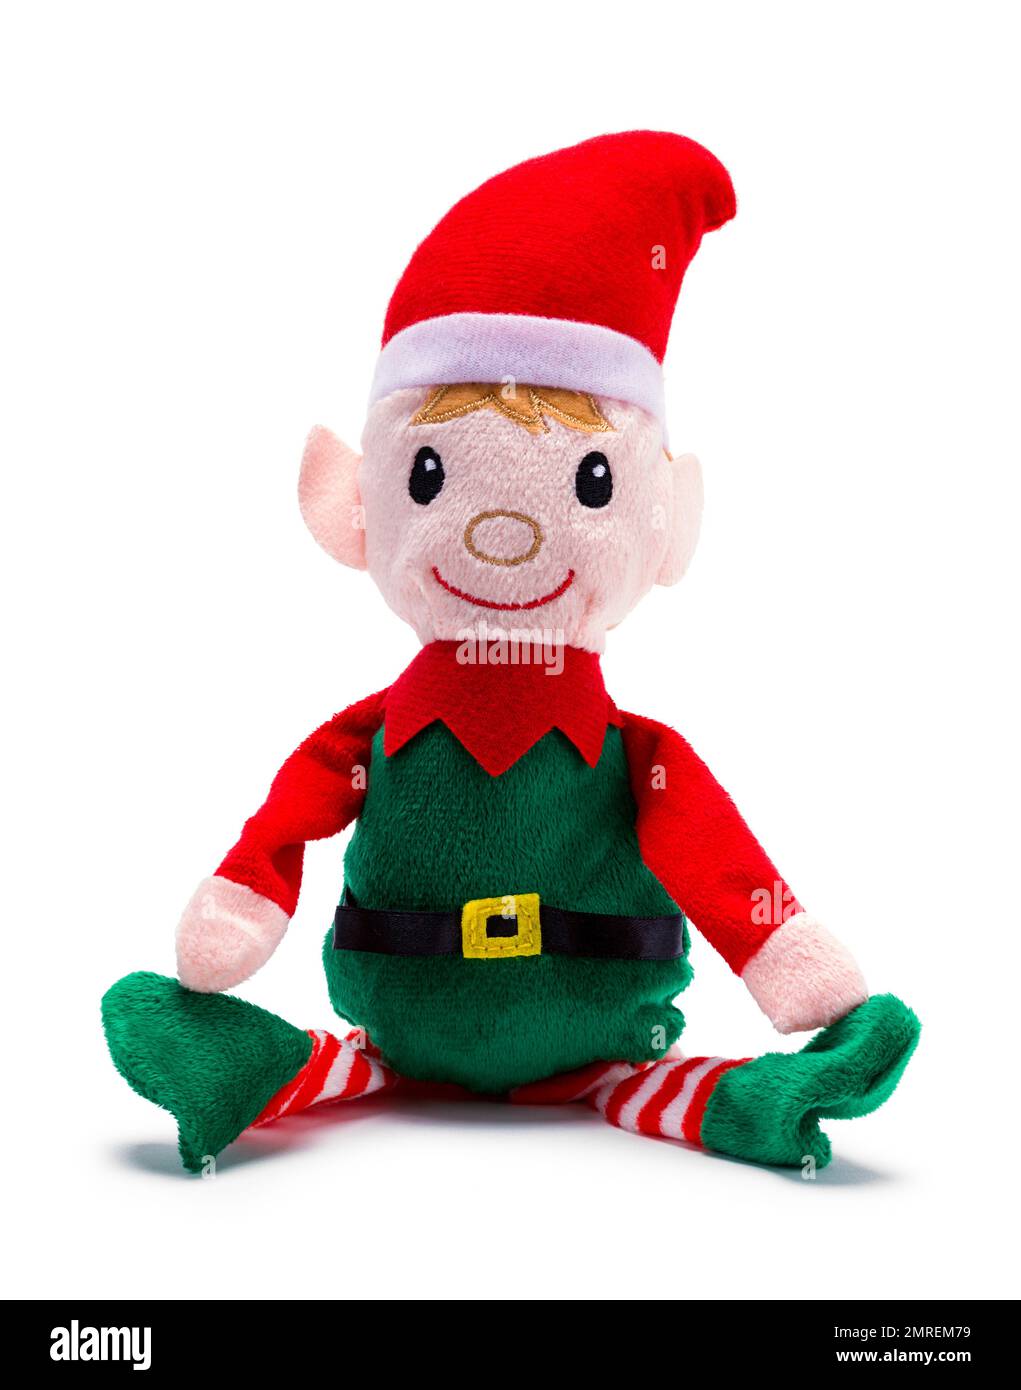 Stuffed Toy Elf Cut Out on White. Stock Photo